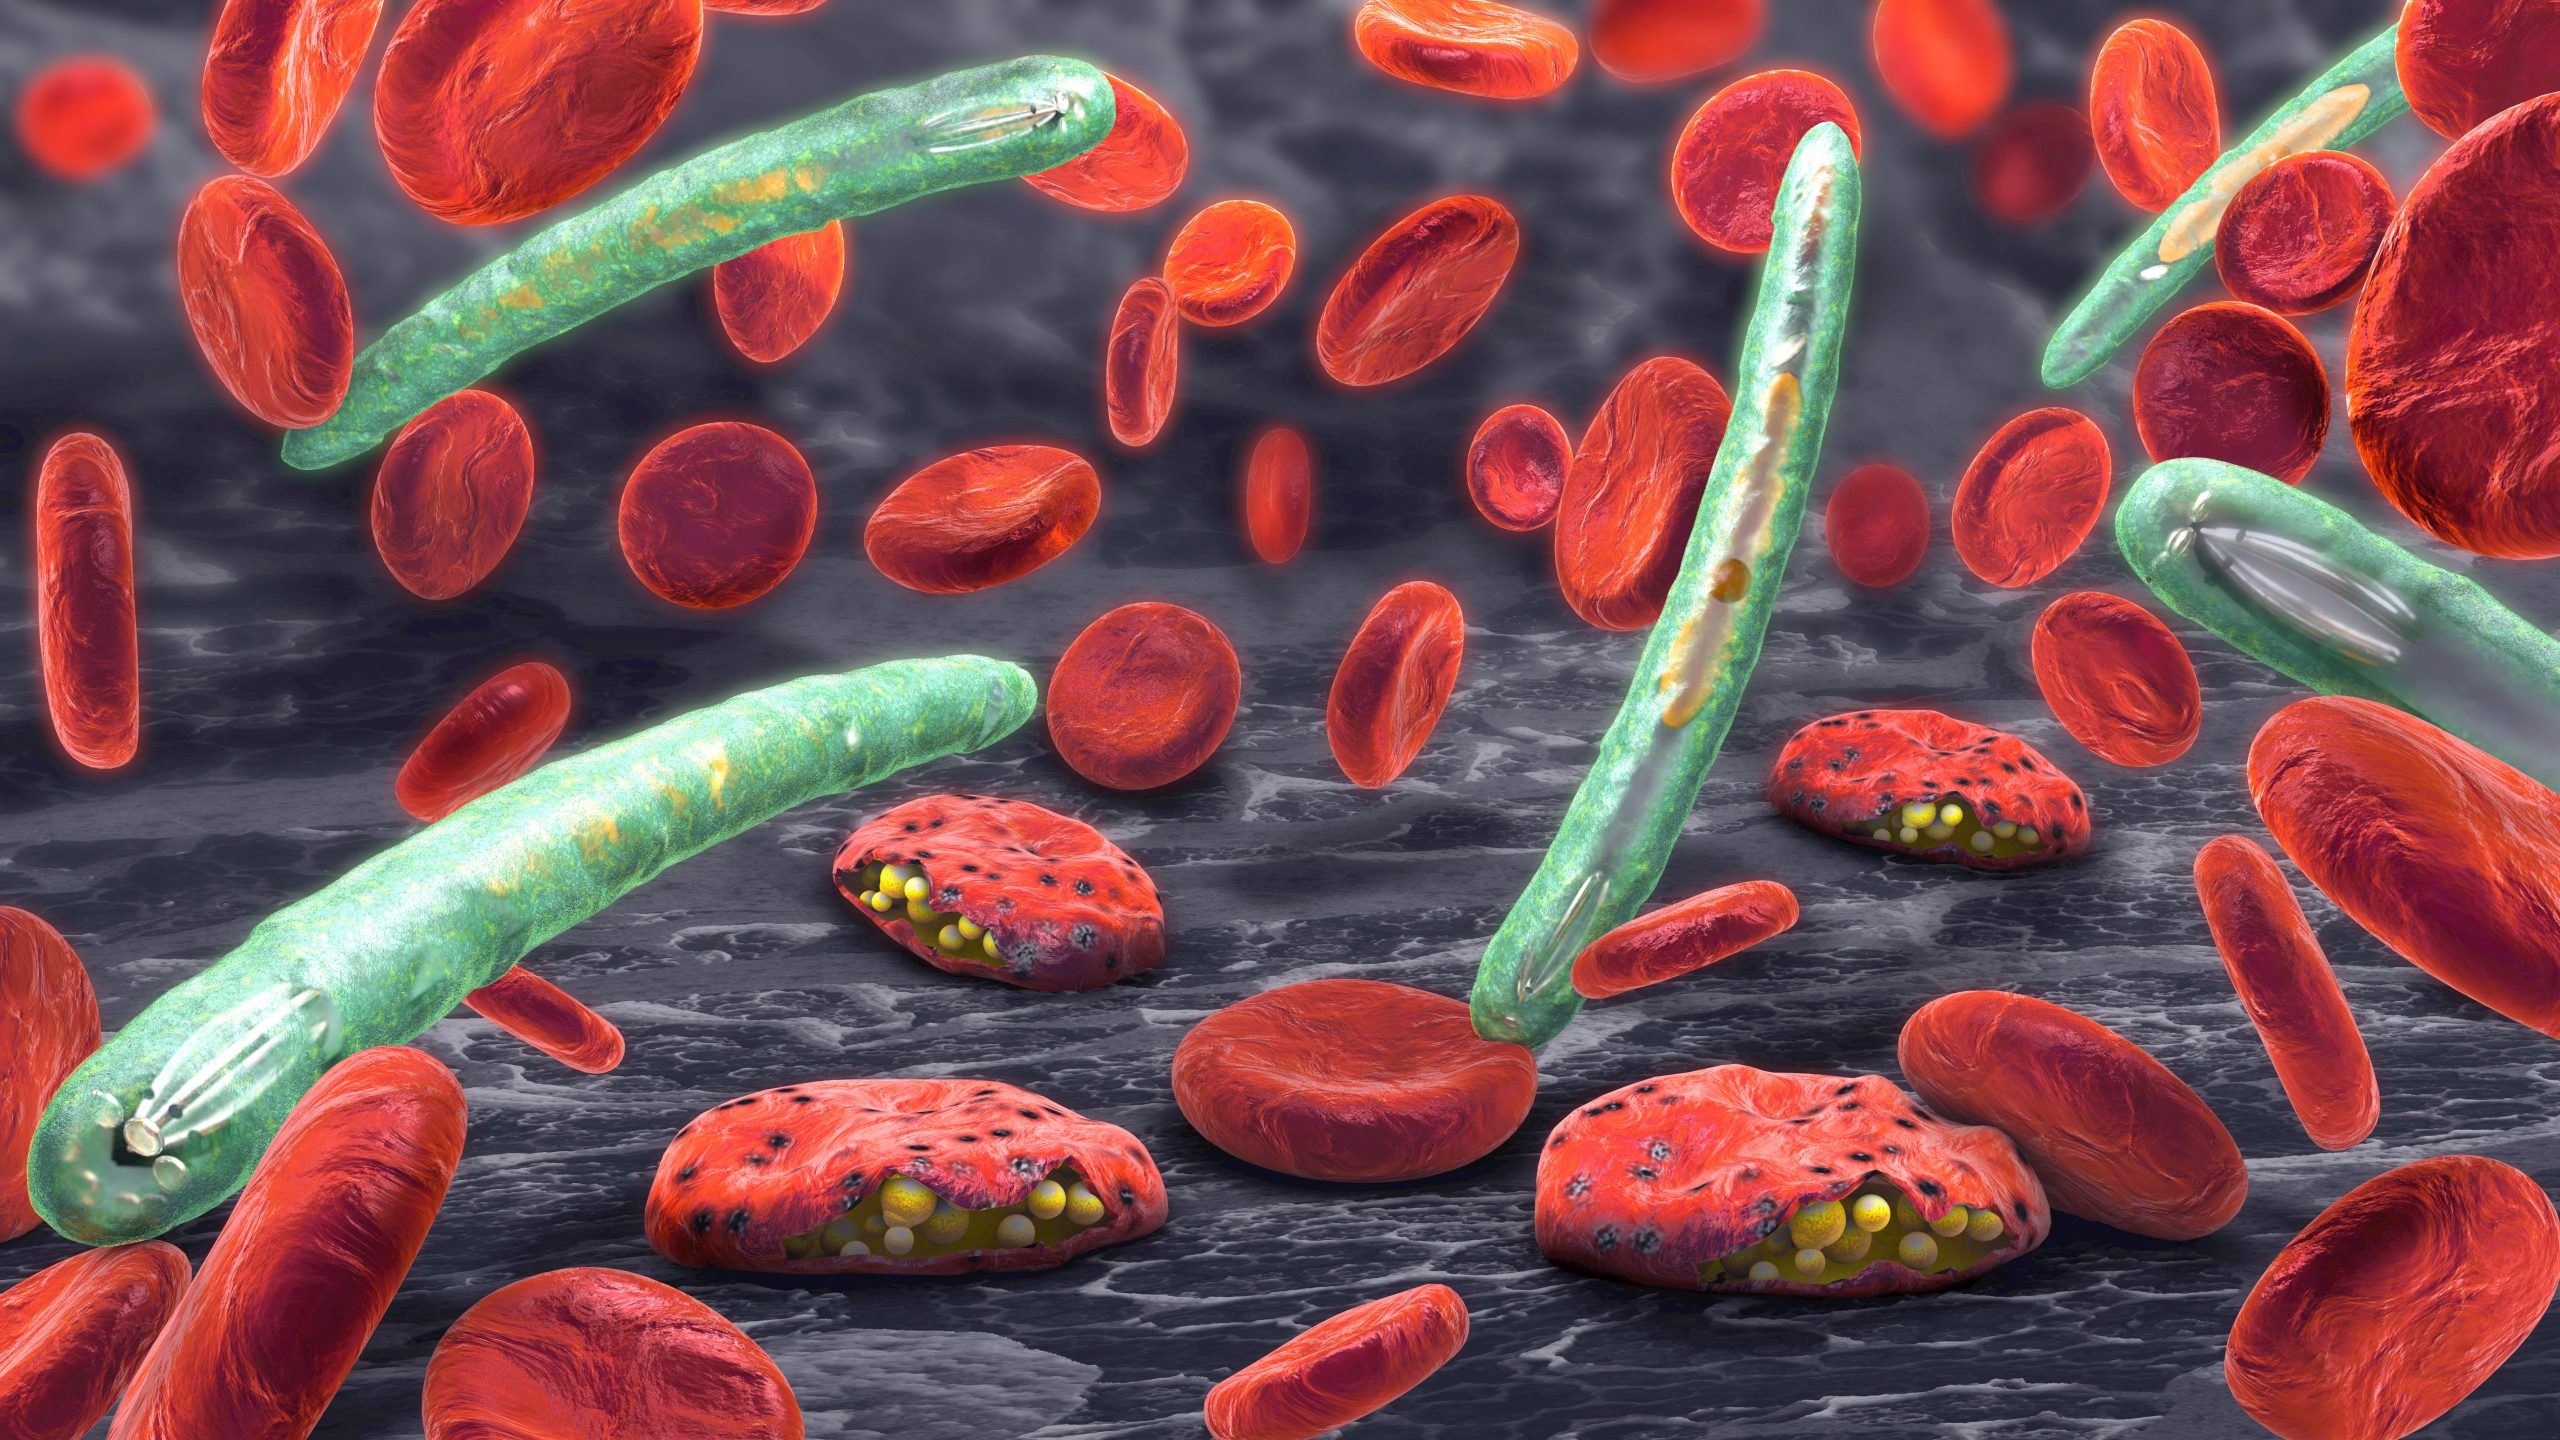 red blood cells with malaria parasite bursting out of them